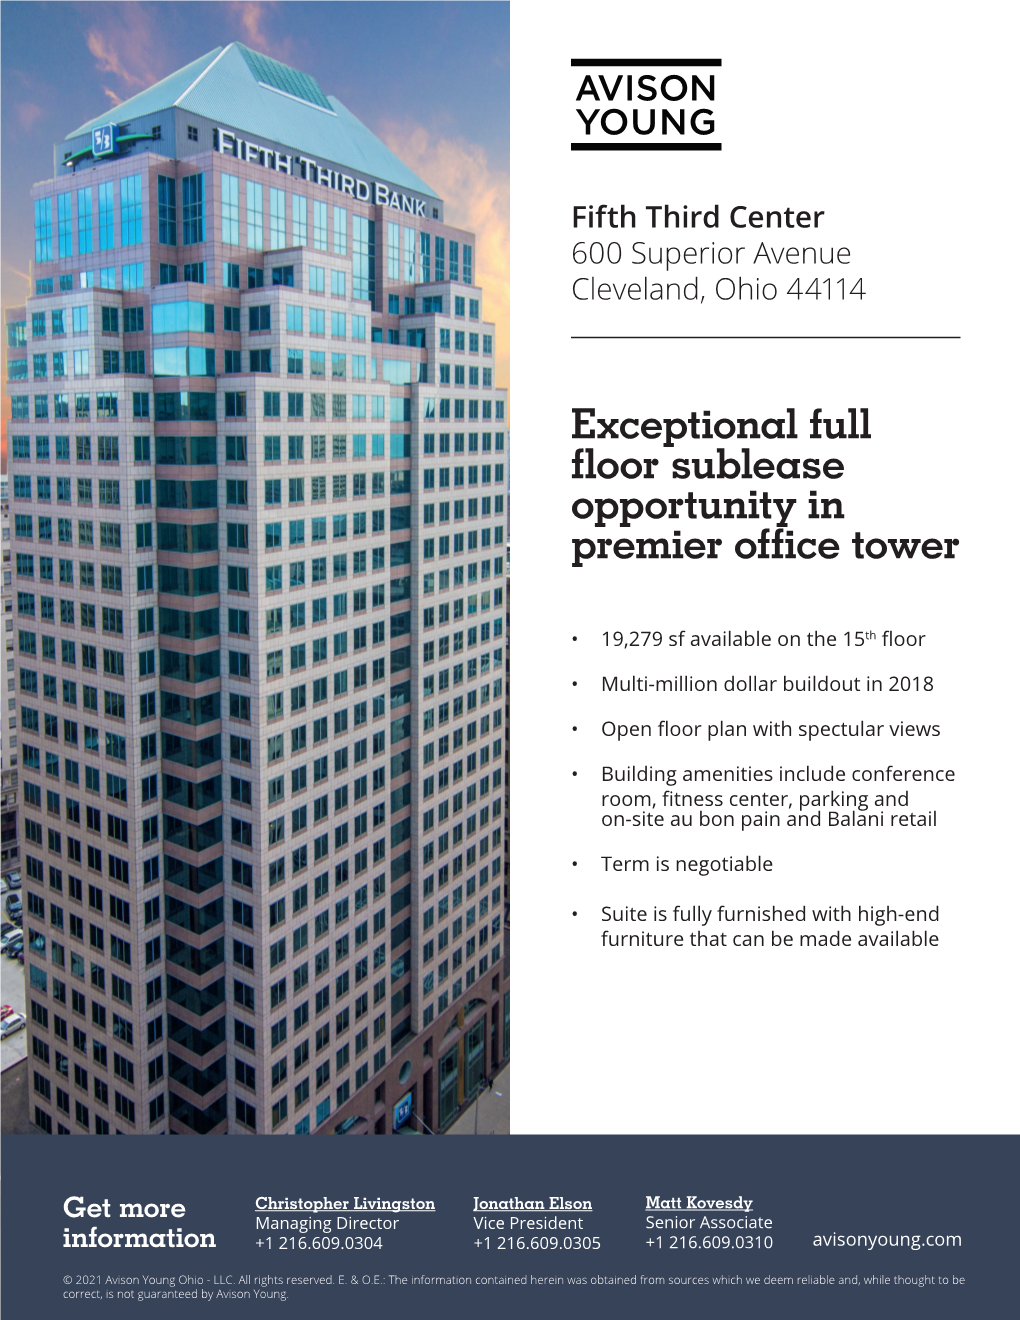 Exceptional Full Floor Sublease Opportunity in Premier Office Tower